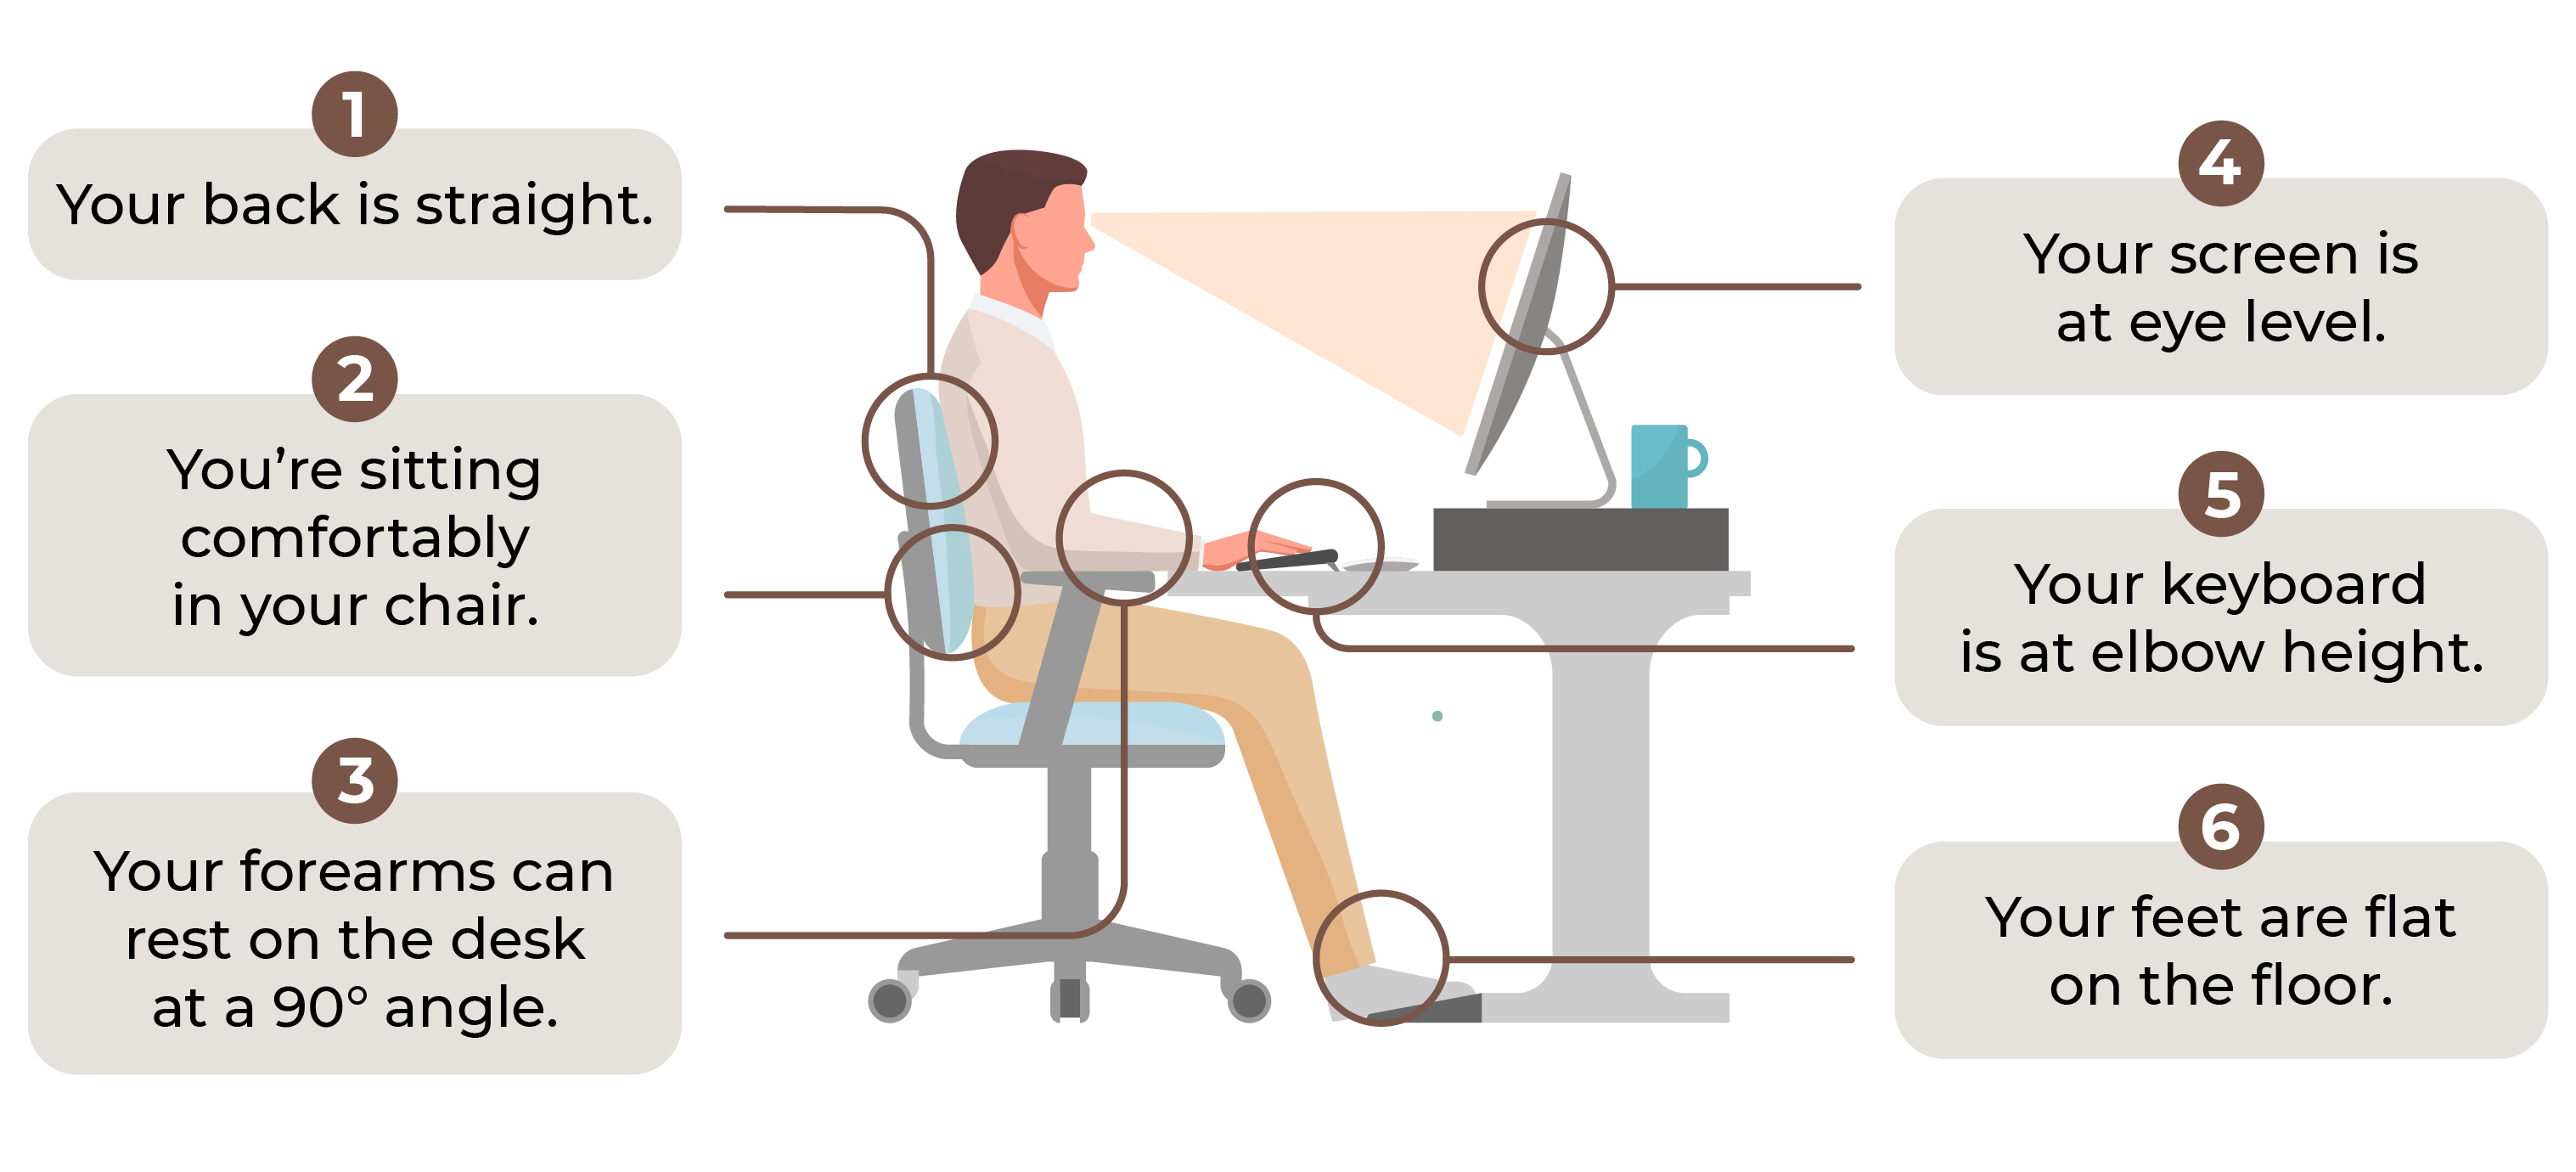 Infographic indicating 6 steps for good posture while working at a desk: straight back, sitting comfortable in chair, forearms at 90° angle, screen at eye level, keyword at elbow height, and feet flat on the floor.